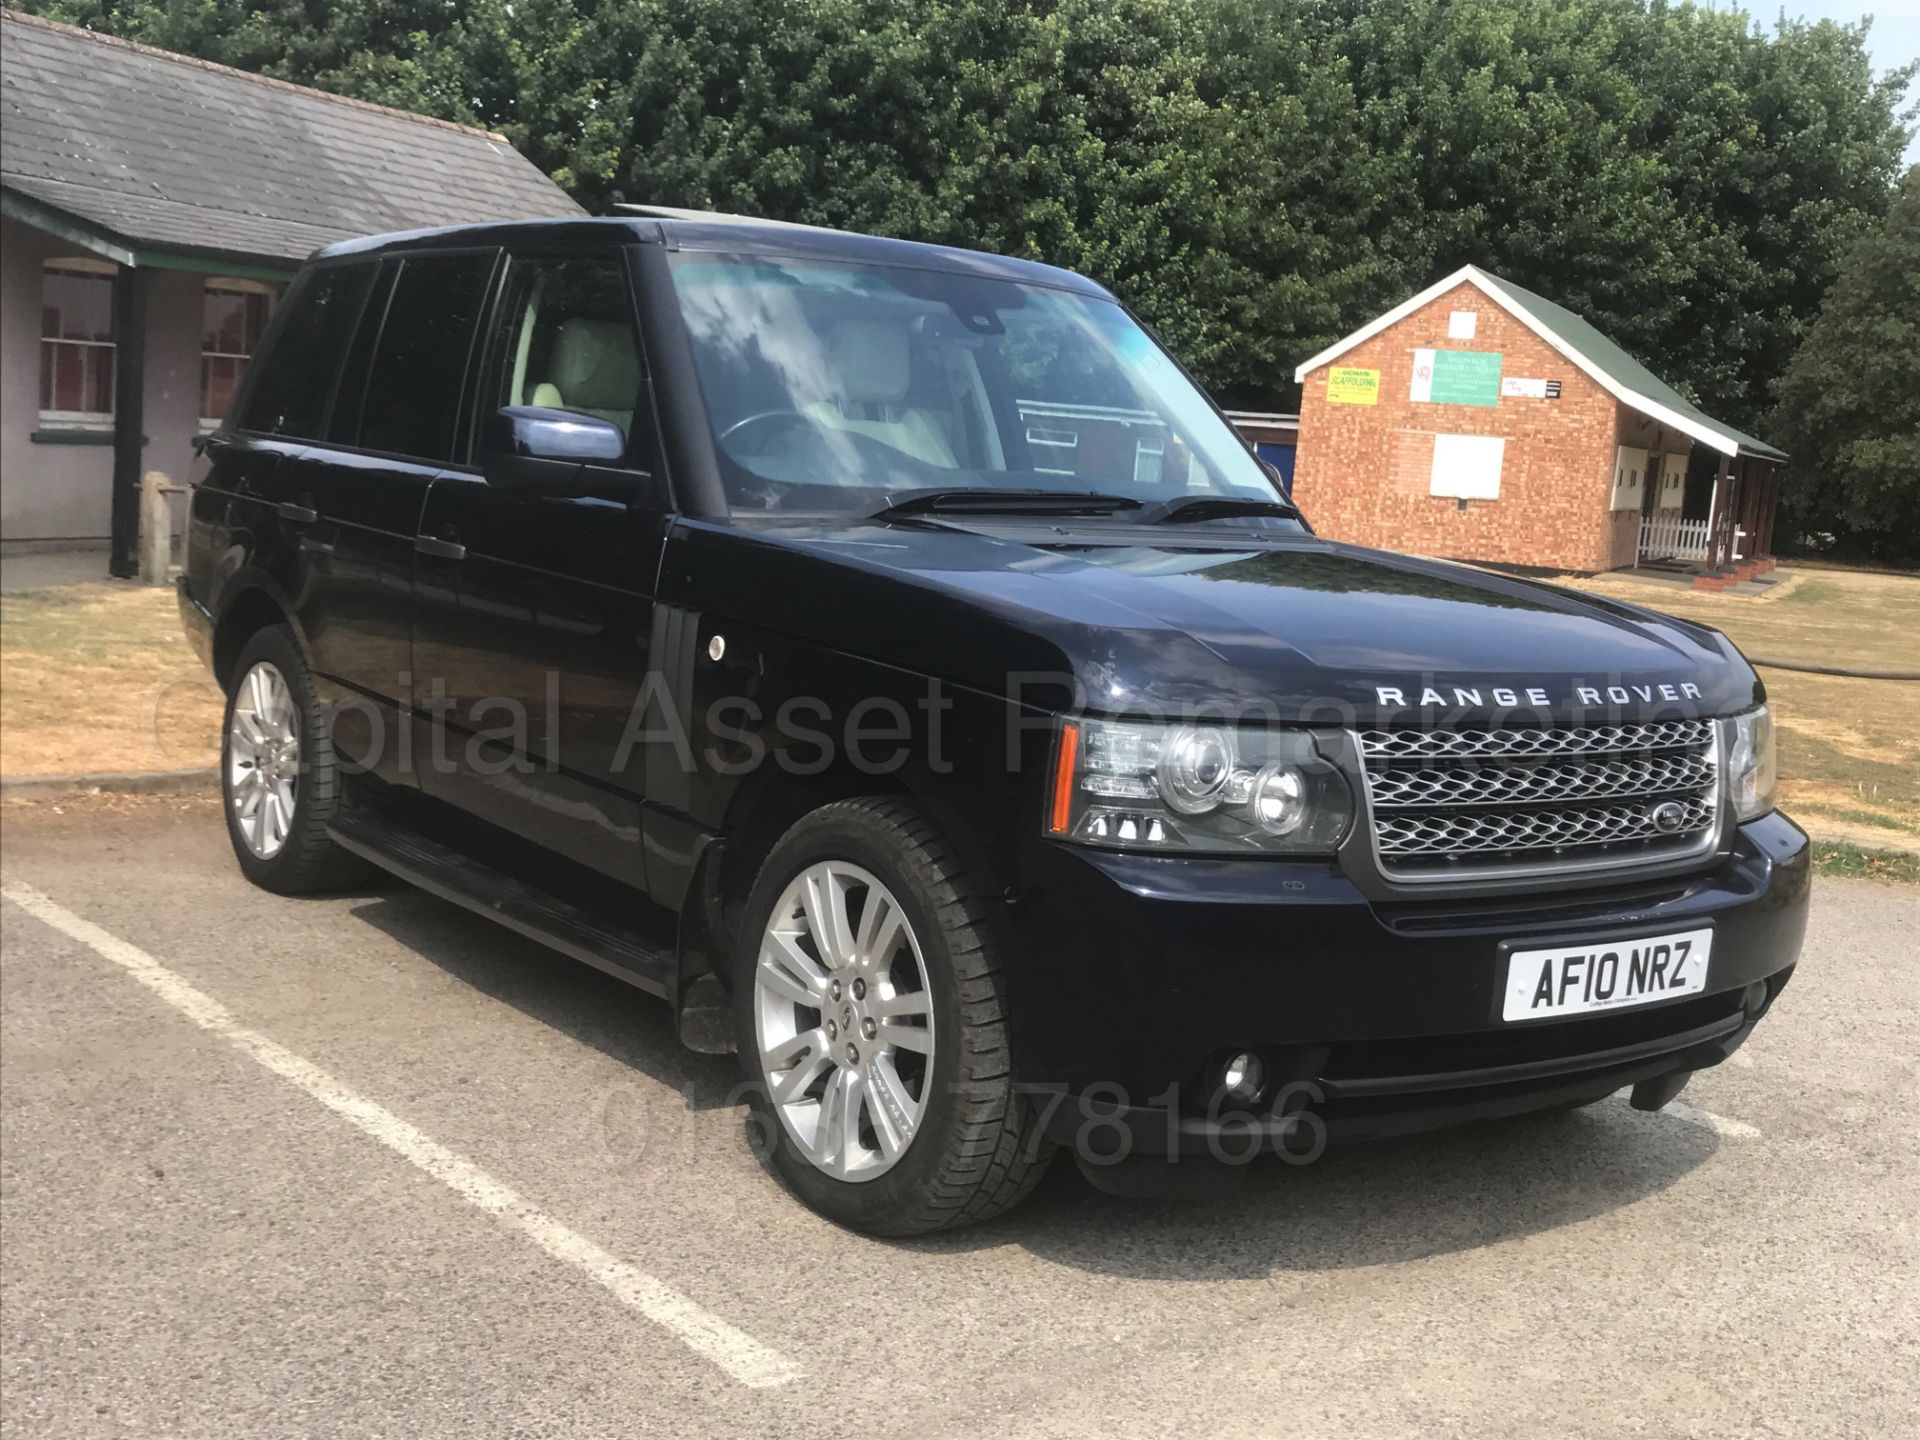 (On Sale) RANGE ROVER VOGUE **SE EDITION** (2010 - FACELIFT EDITION) 'TDV8 - 268 BHP - AUTO' **WOW** - Image 2 of 62